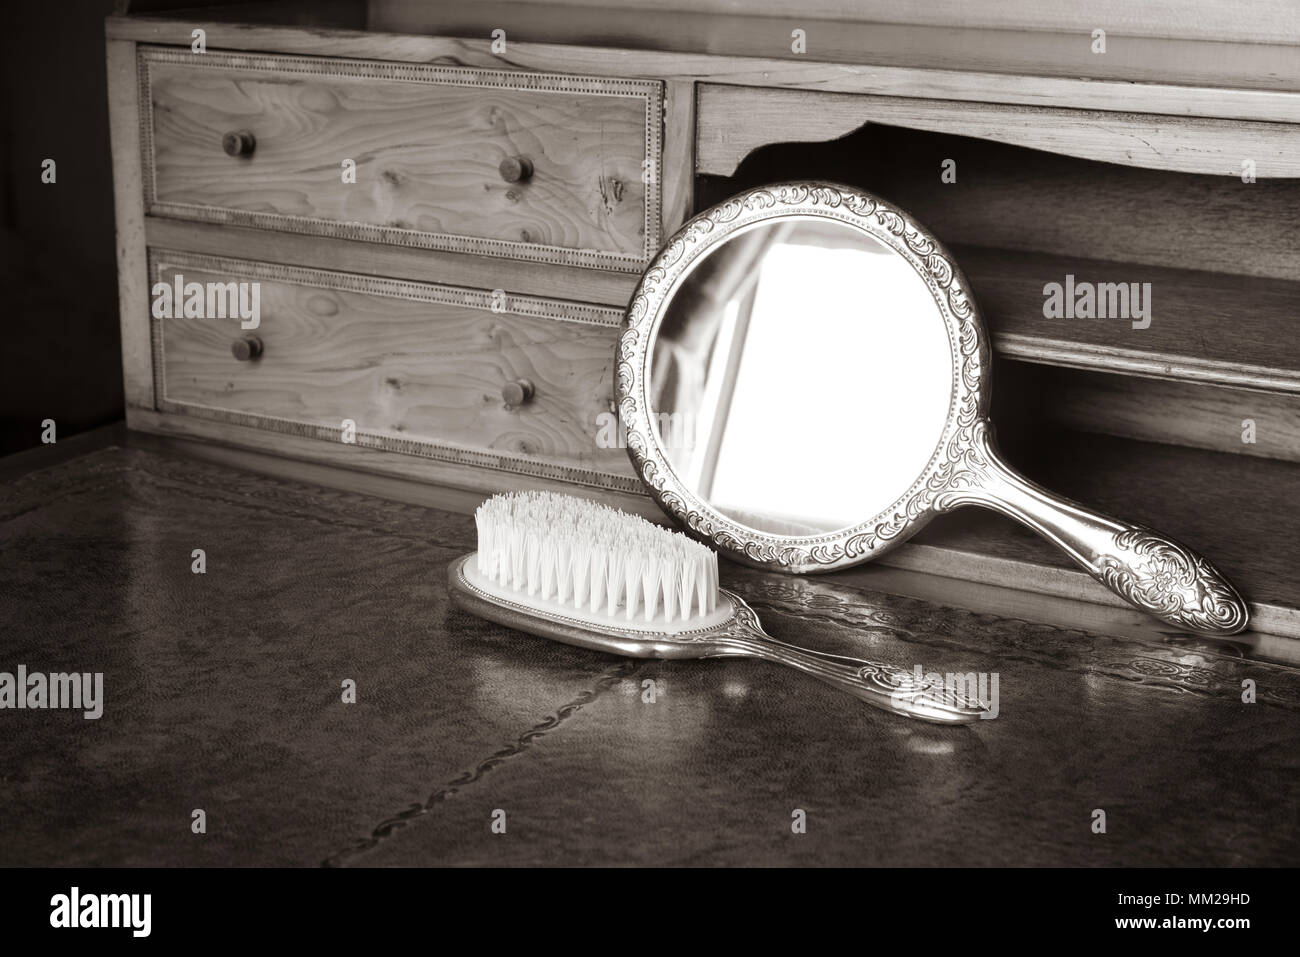 Antique Wooden Desk With Siver Mirror And Hair Brush In Sepia